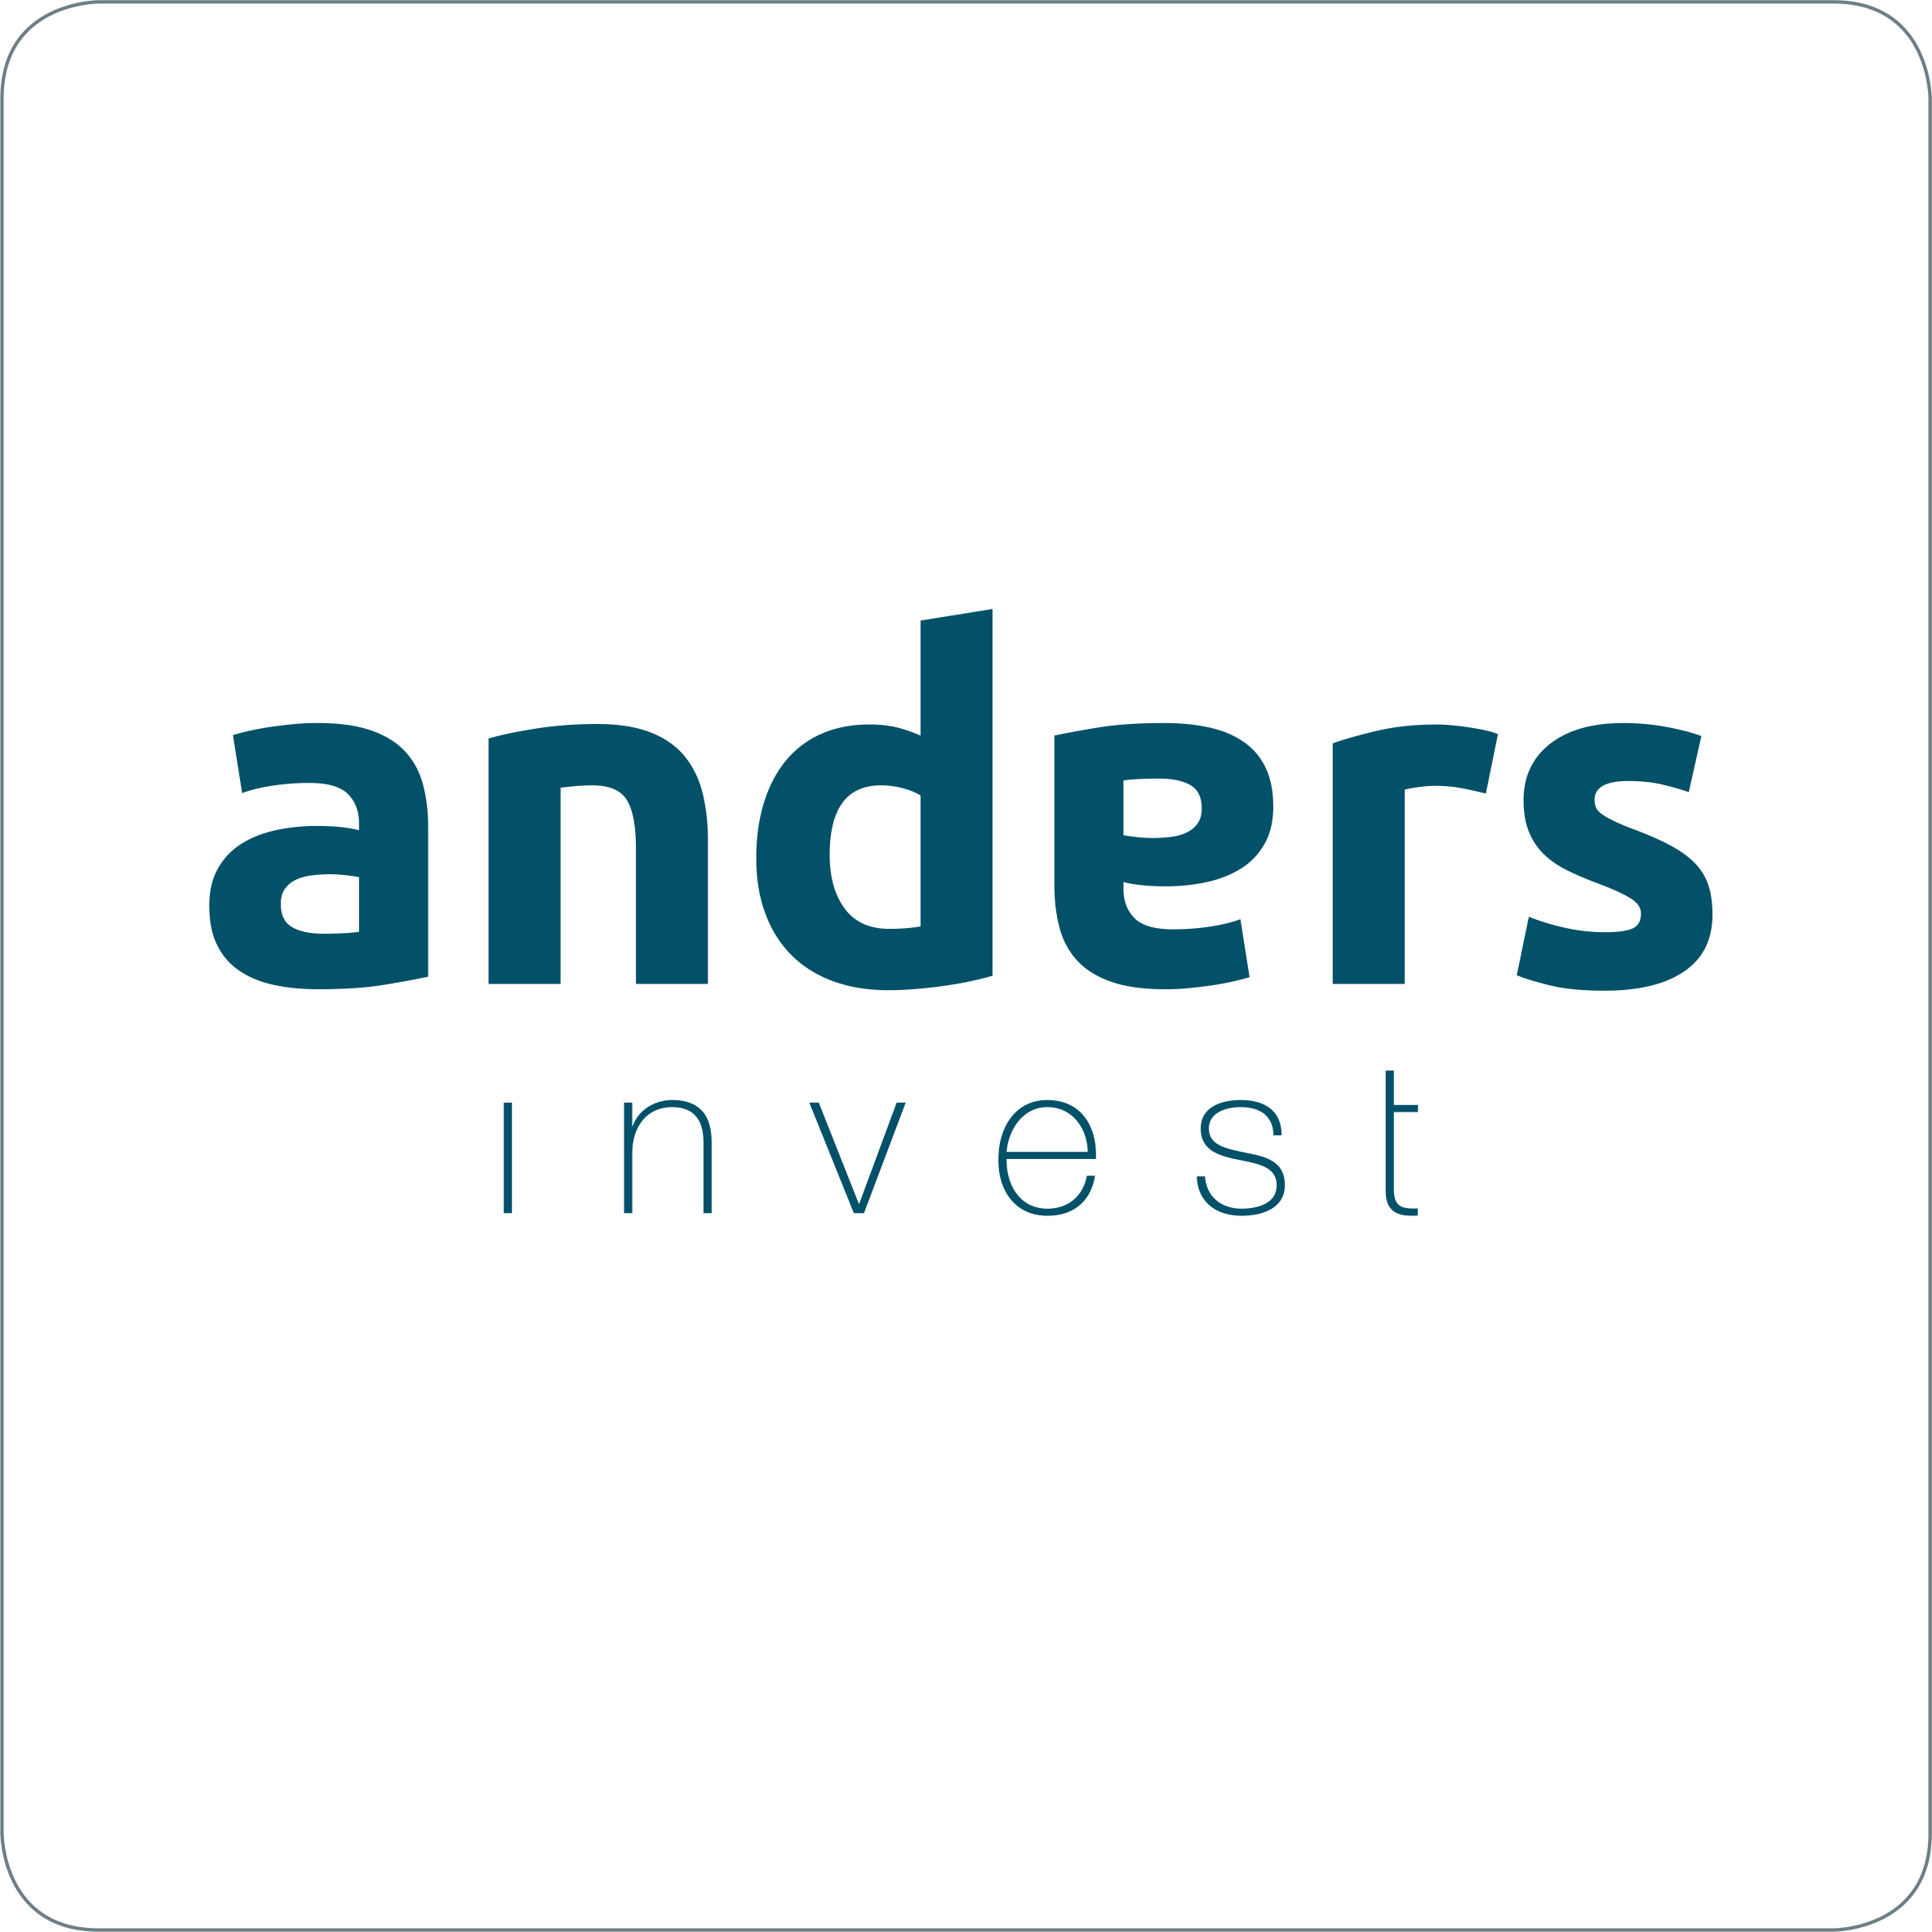 Anders Invest